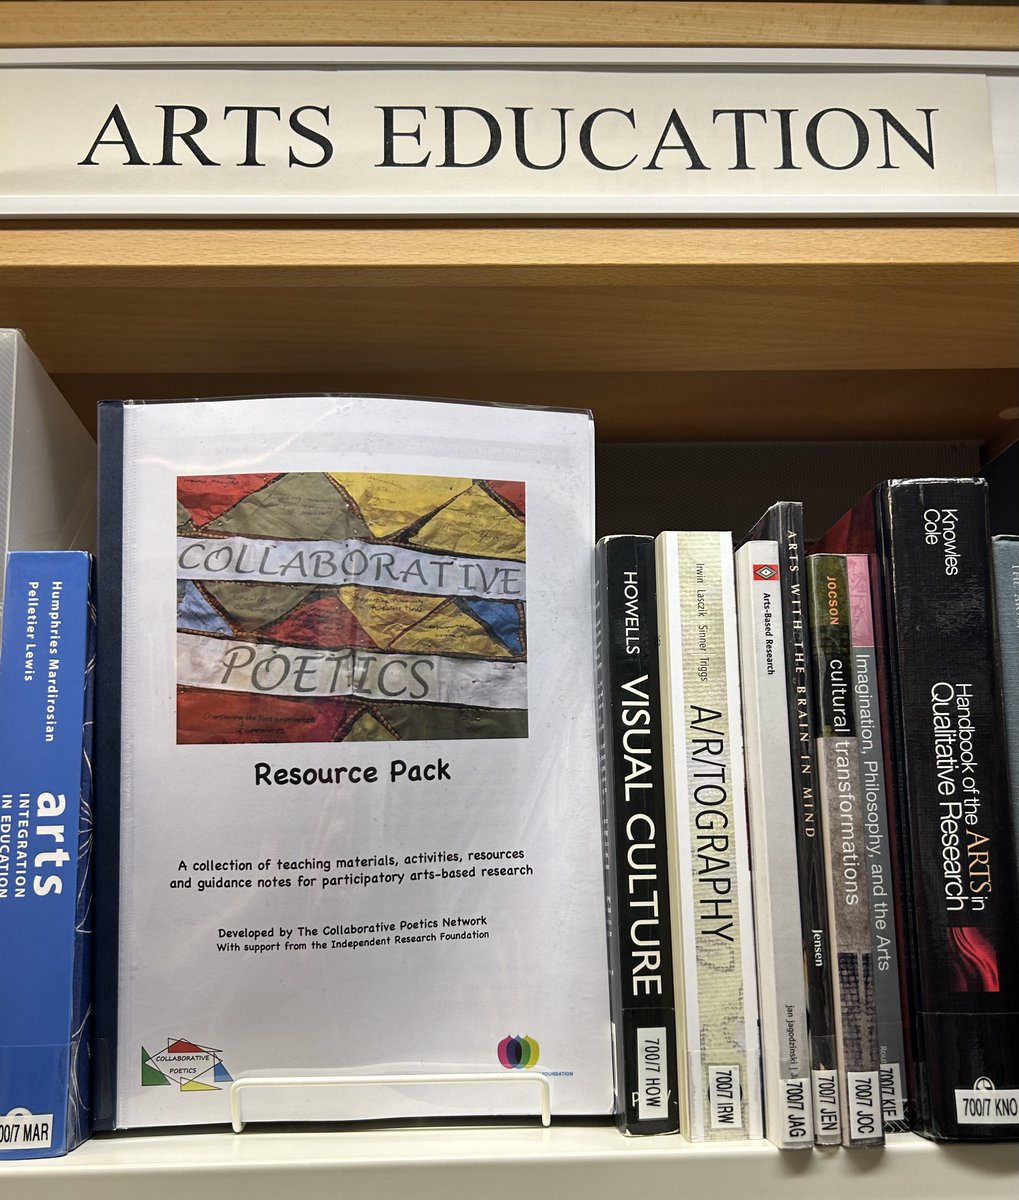 Many thanks to @pamburnard for her kind donation of *Collaborative Poetics resource pack* which is now on the @camedfac Library shelves (700/7 CPN) Find out more about @CollabPoetics on their blog: blogs.brighton.ac.uk/collaborativep…